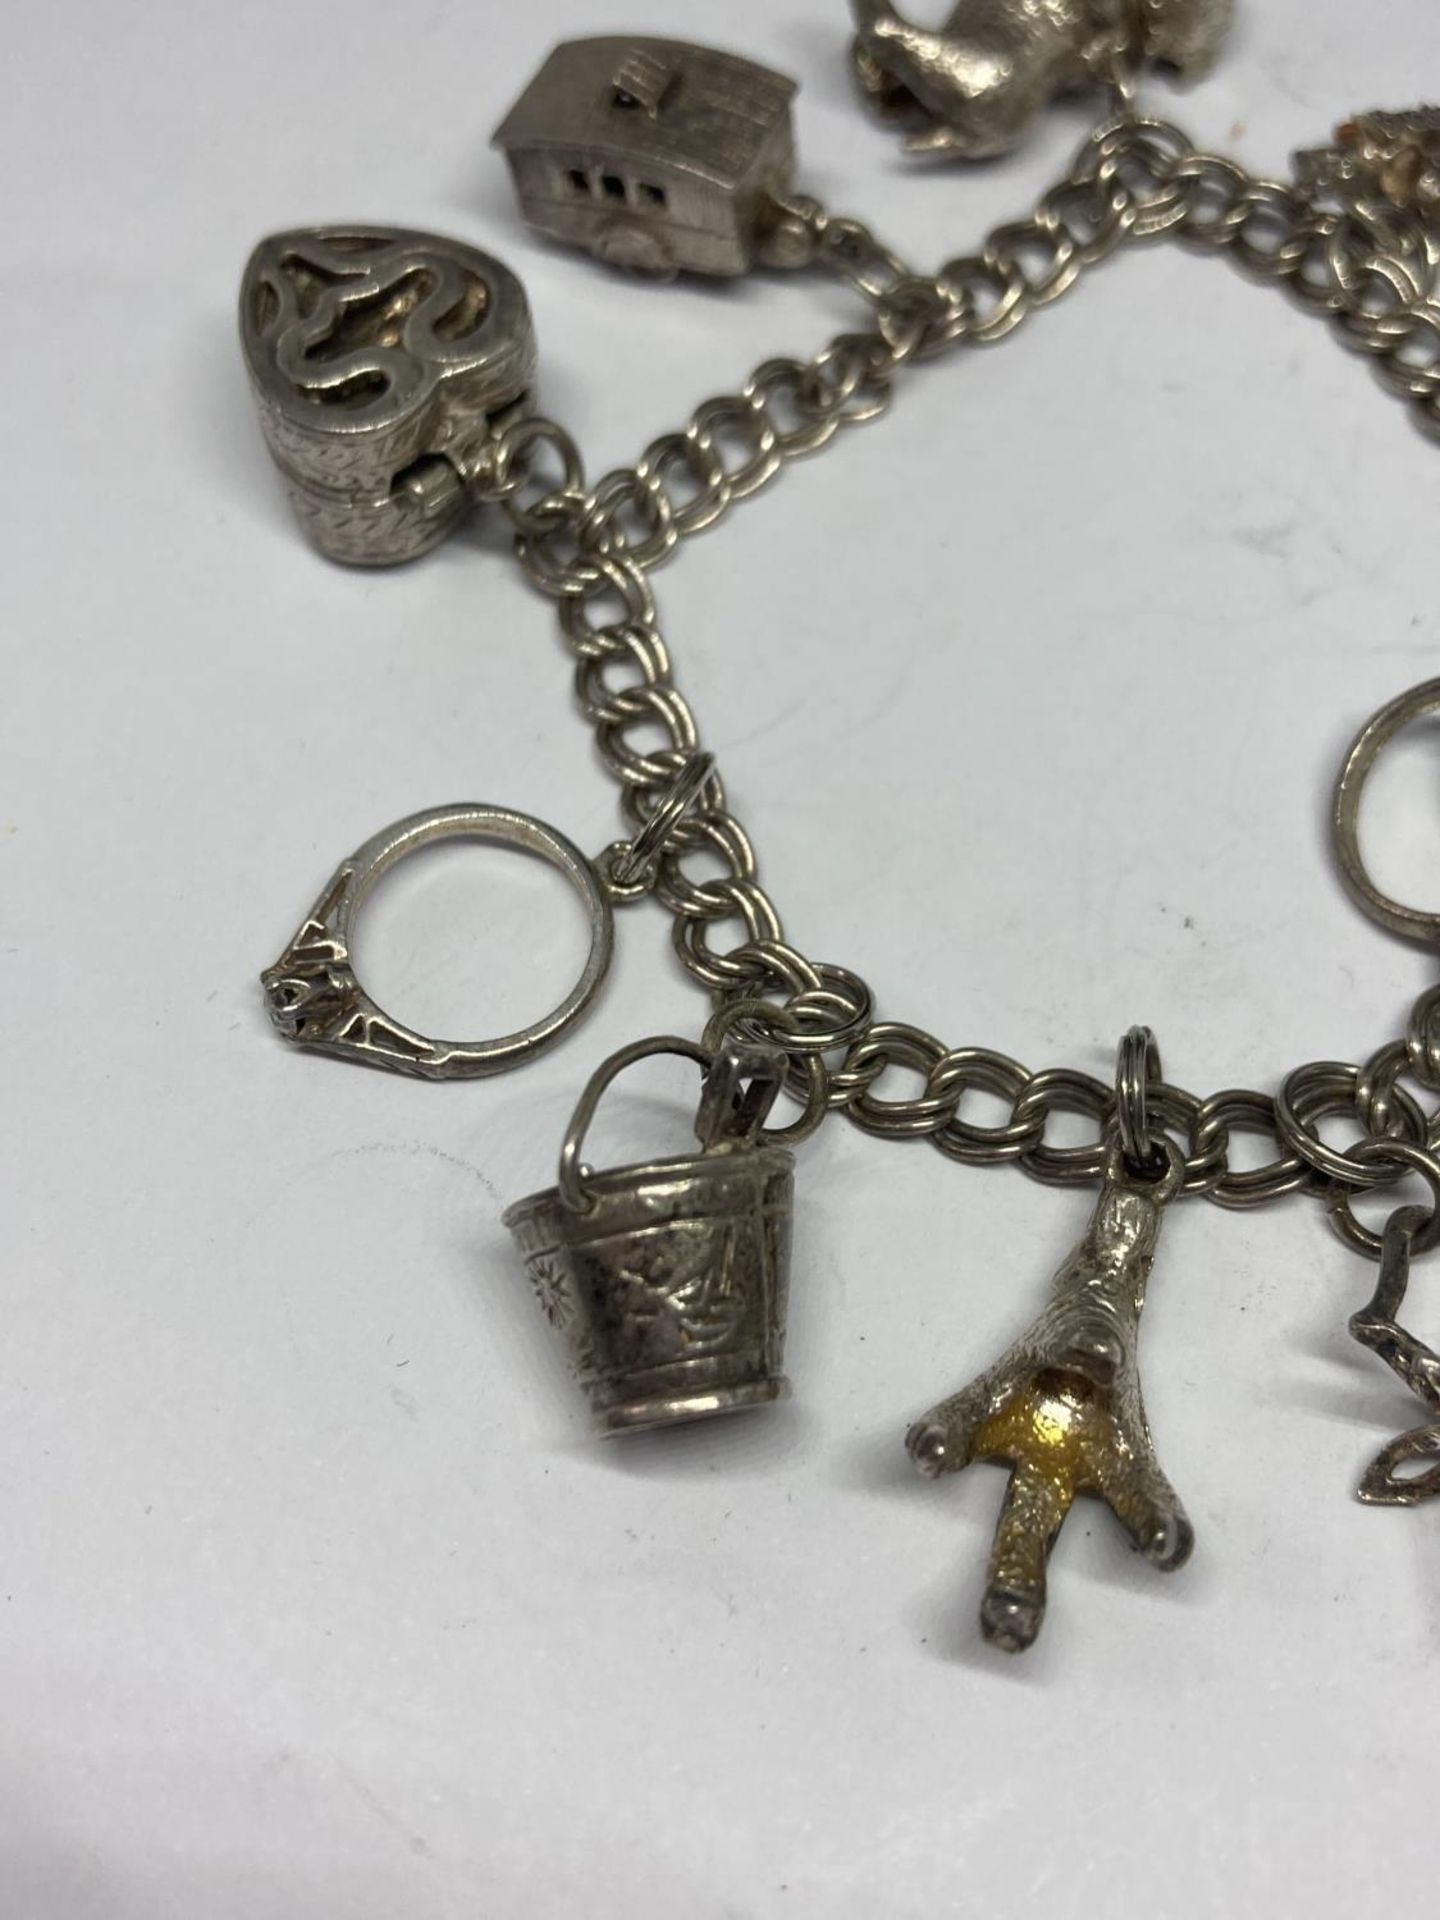 A SILVER CHARM BRACELET WITH TEN CHARMS - Image 3 of 4